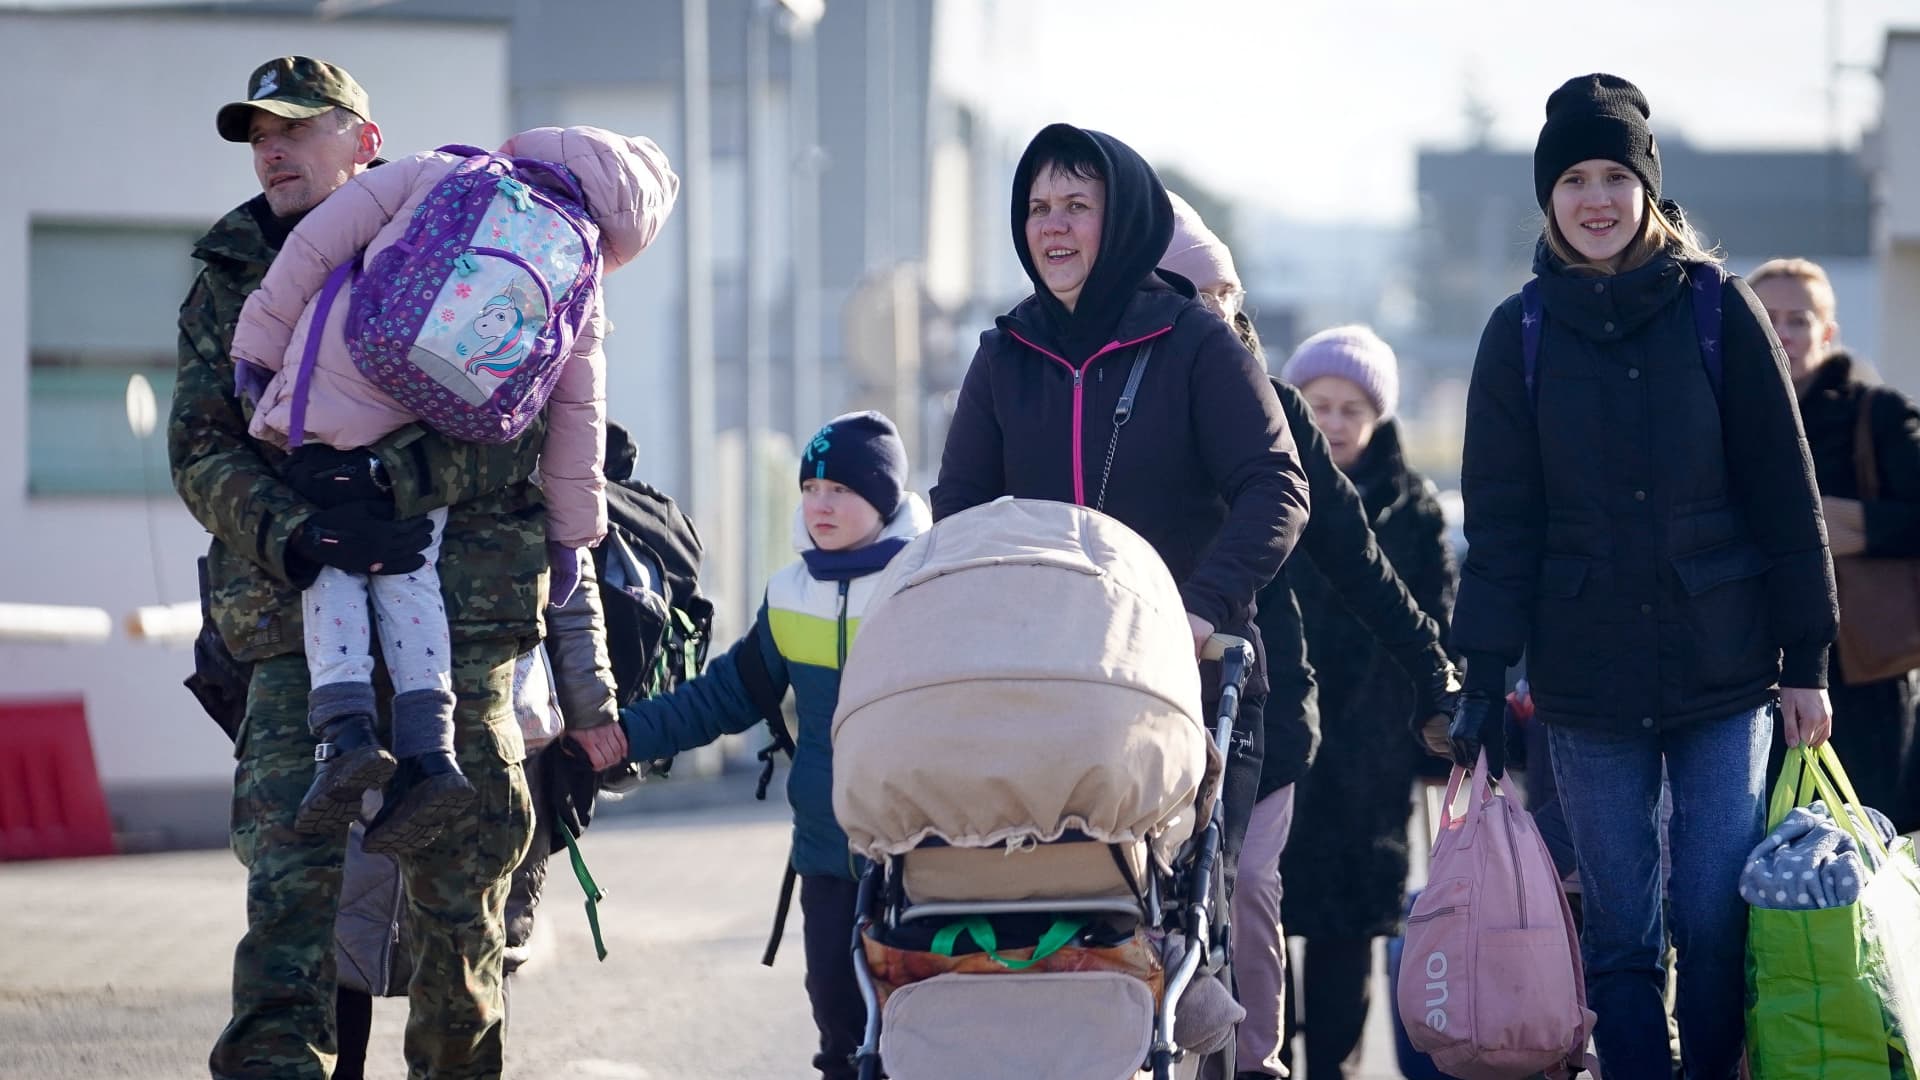 A Polish border guard carries a child across the border after Russia launched a massive military operation against Ukraine that forced her family to flee their home, in Medyka, Poland, February 26, 2022.